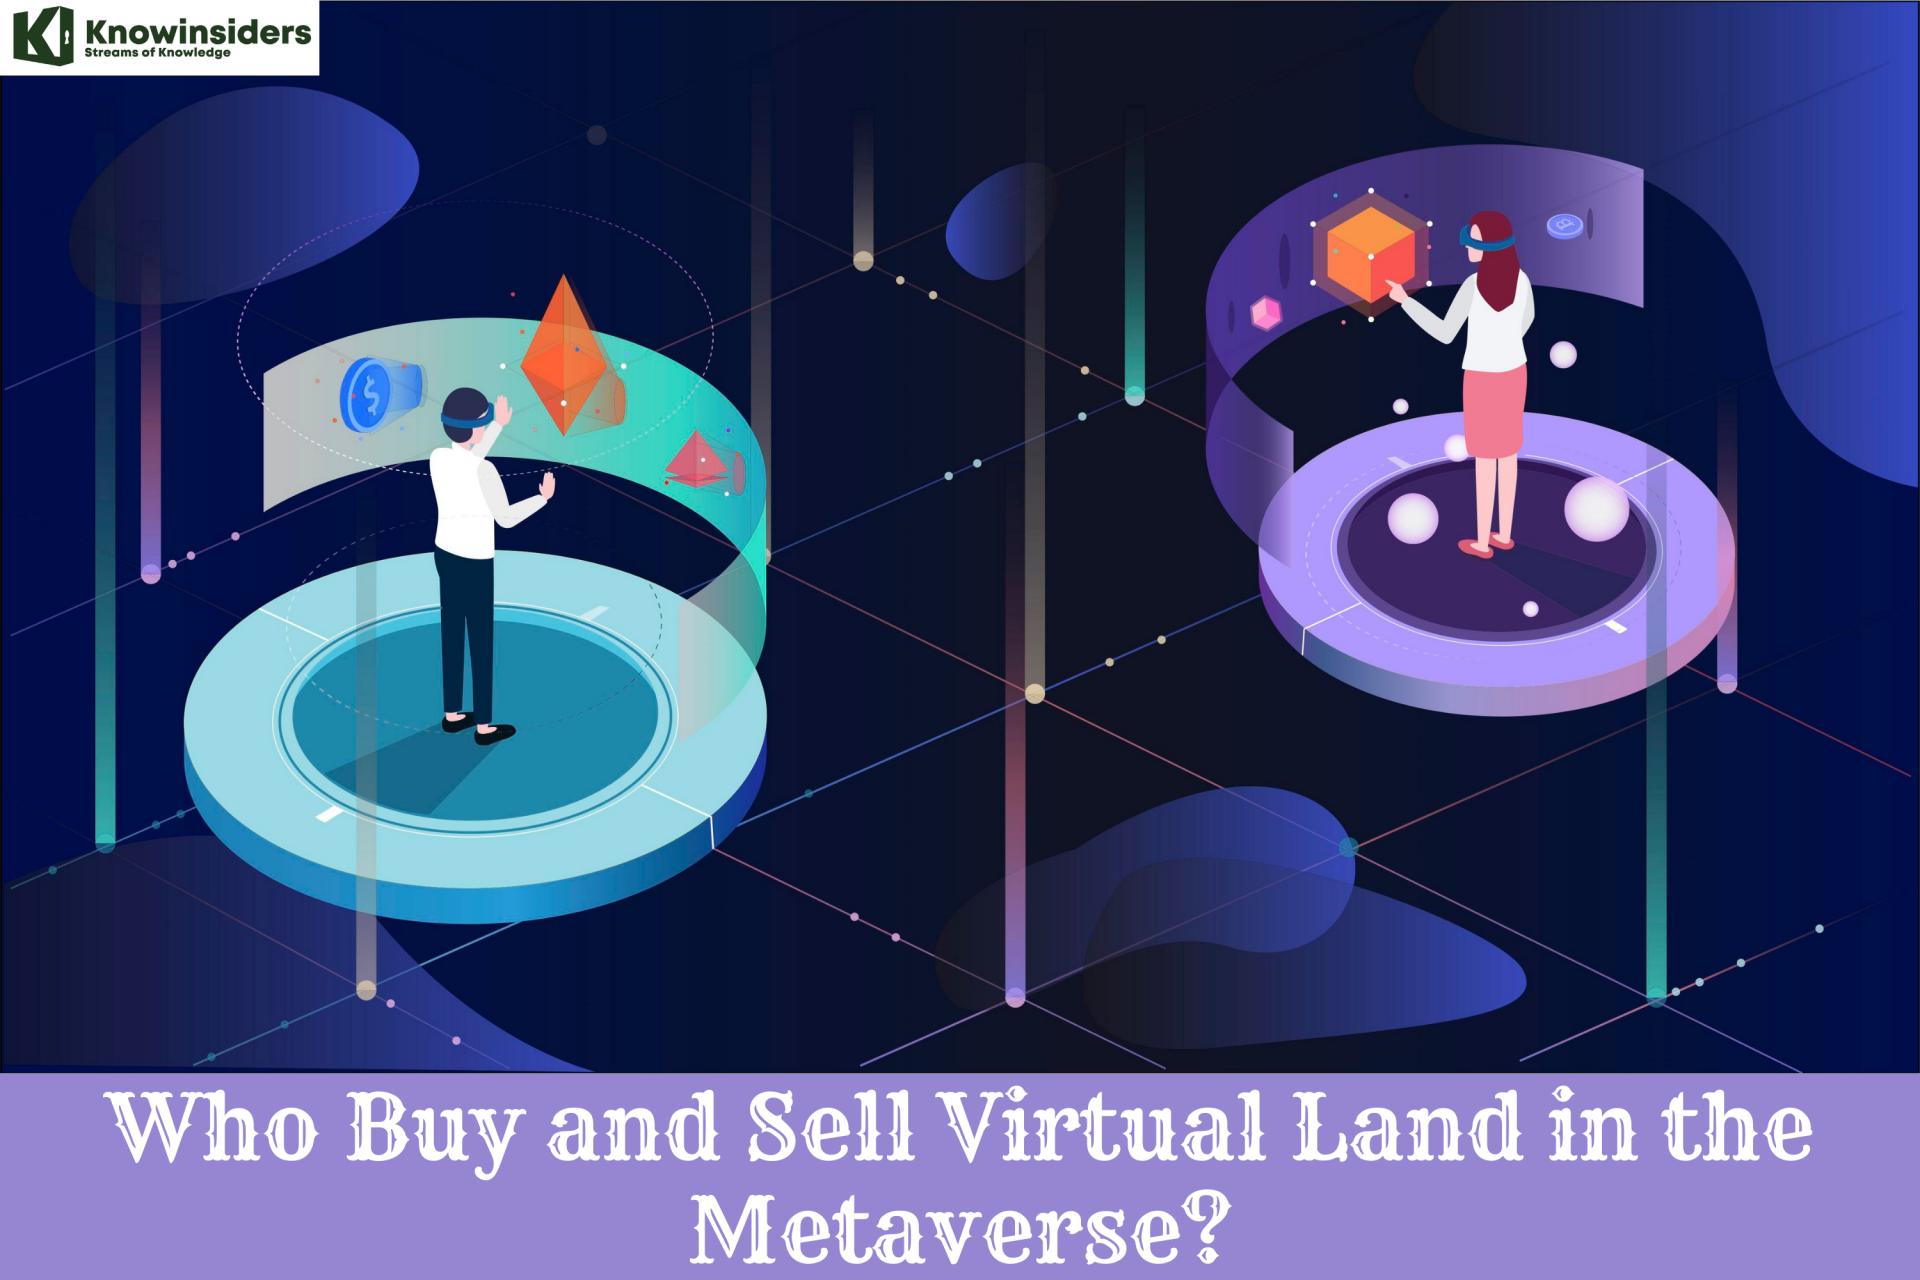 Who Buy and Sell Virtual Land in the Metaverse?